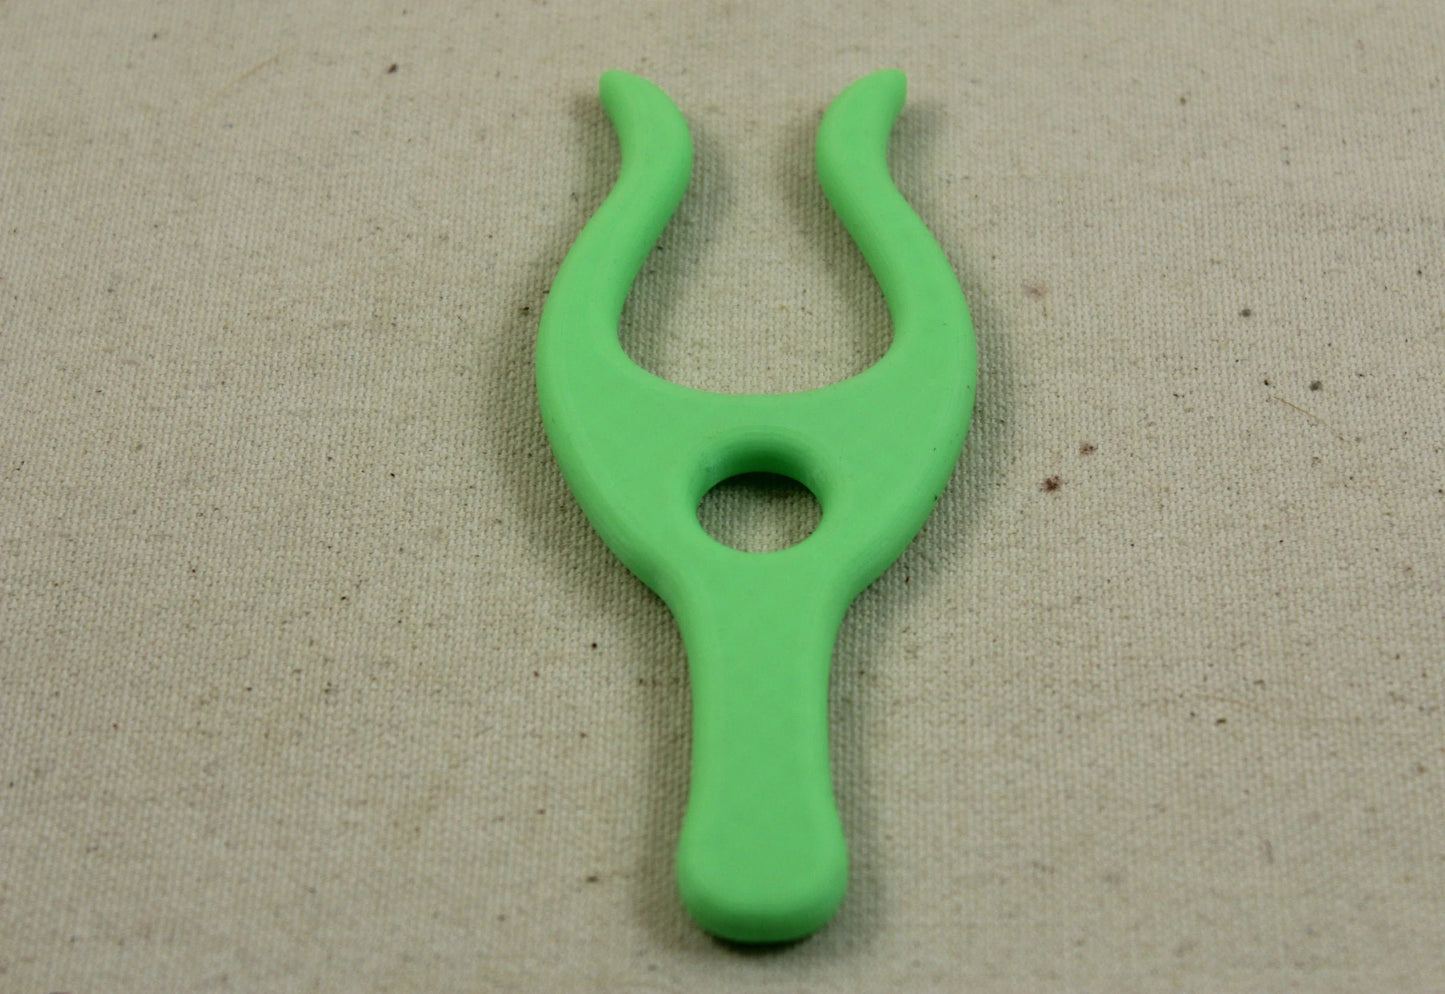 3D printed Small Lucet with Handle